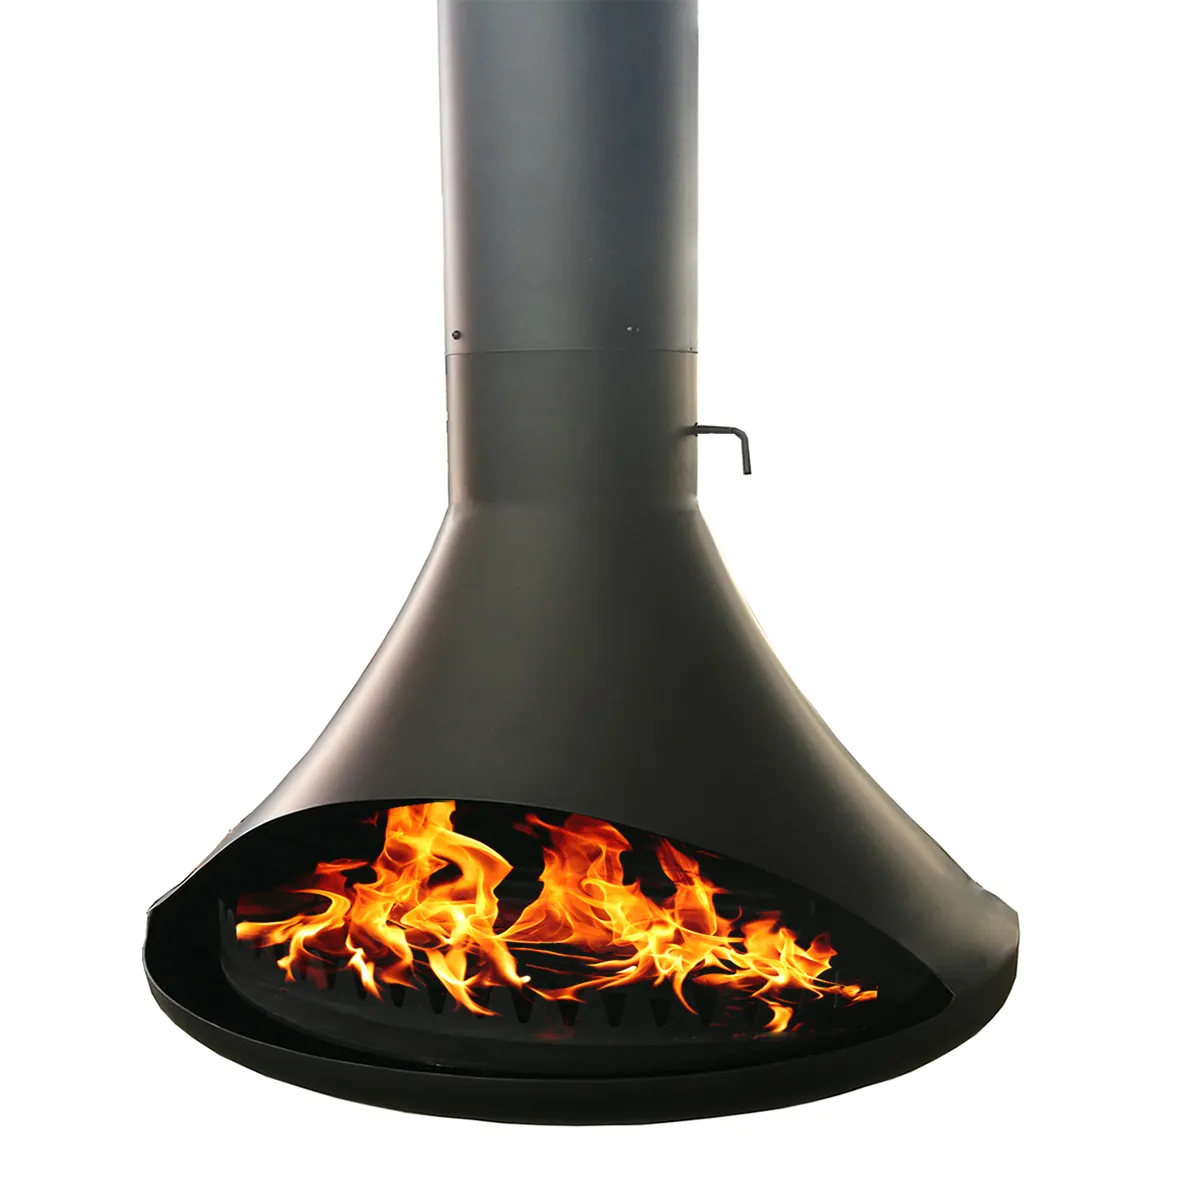 USA hot sale factory price high quality suspend wood fireplace WM-H001 hanged wood stove